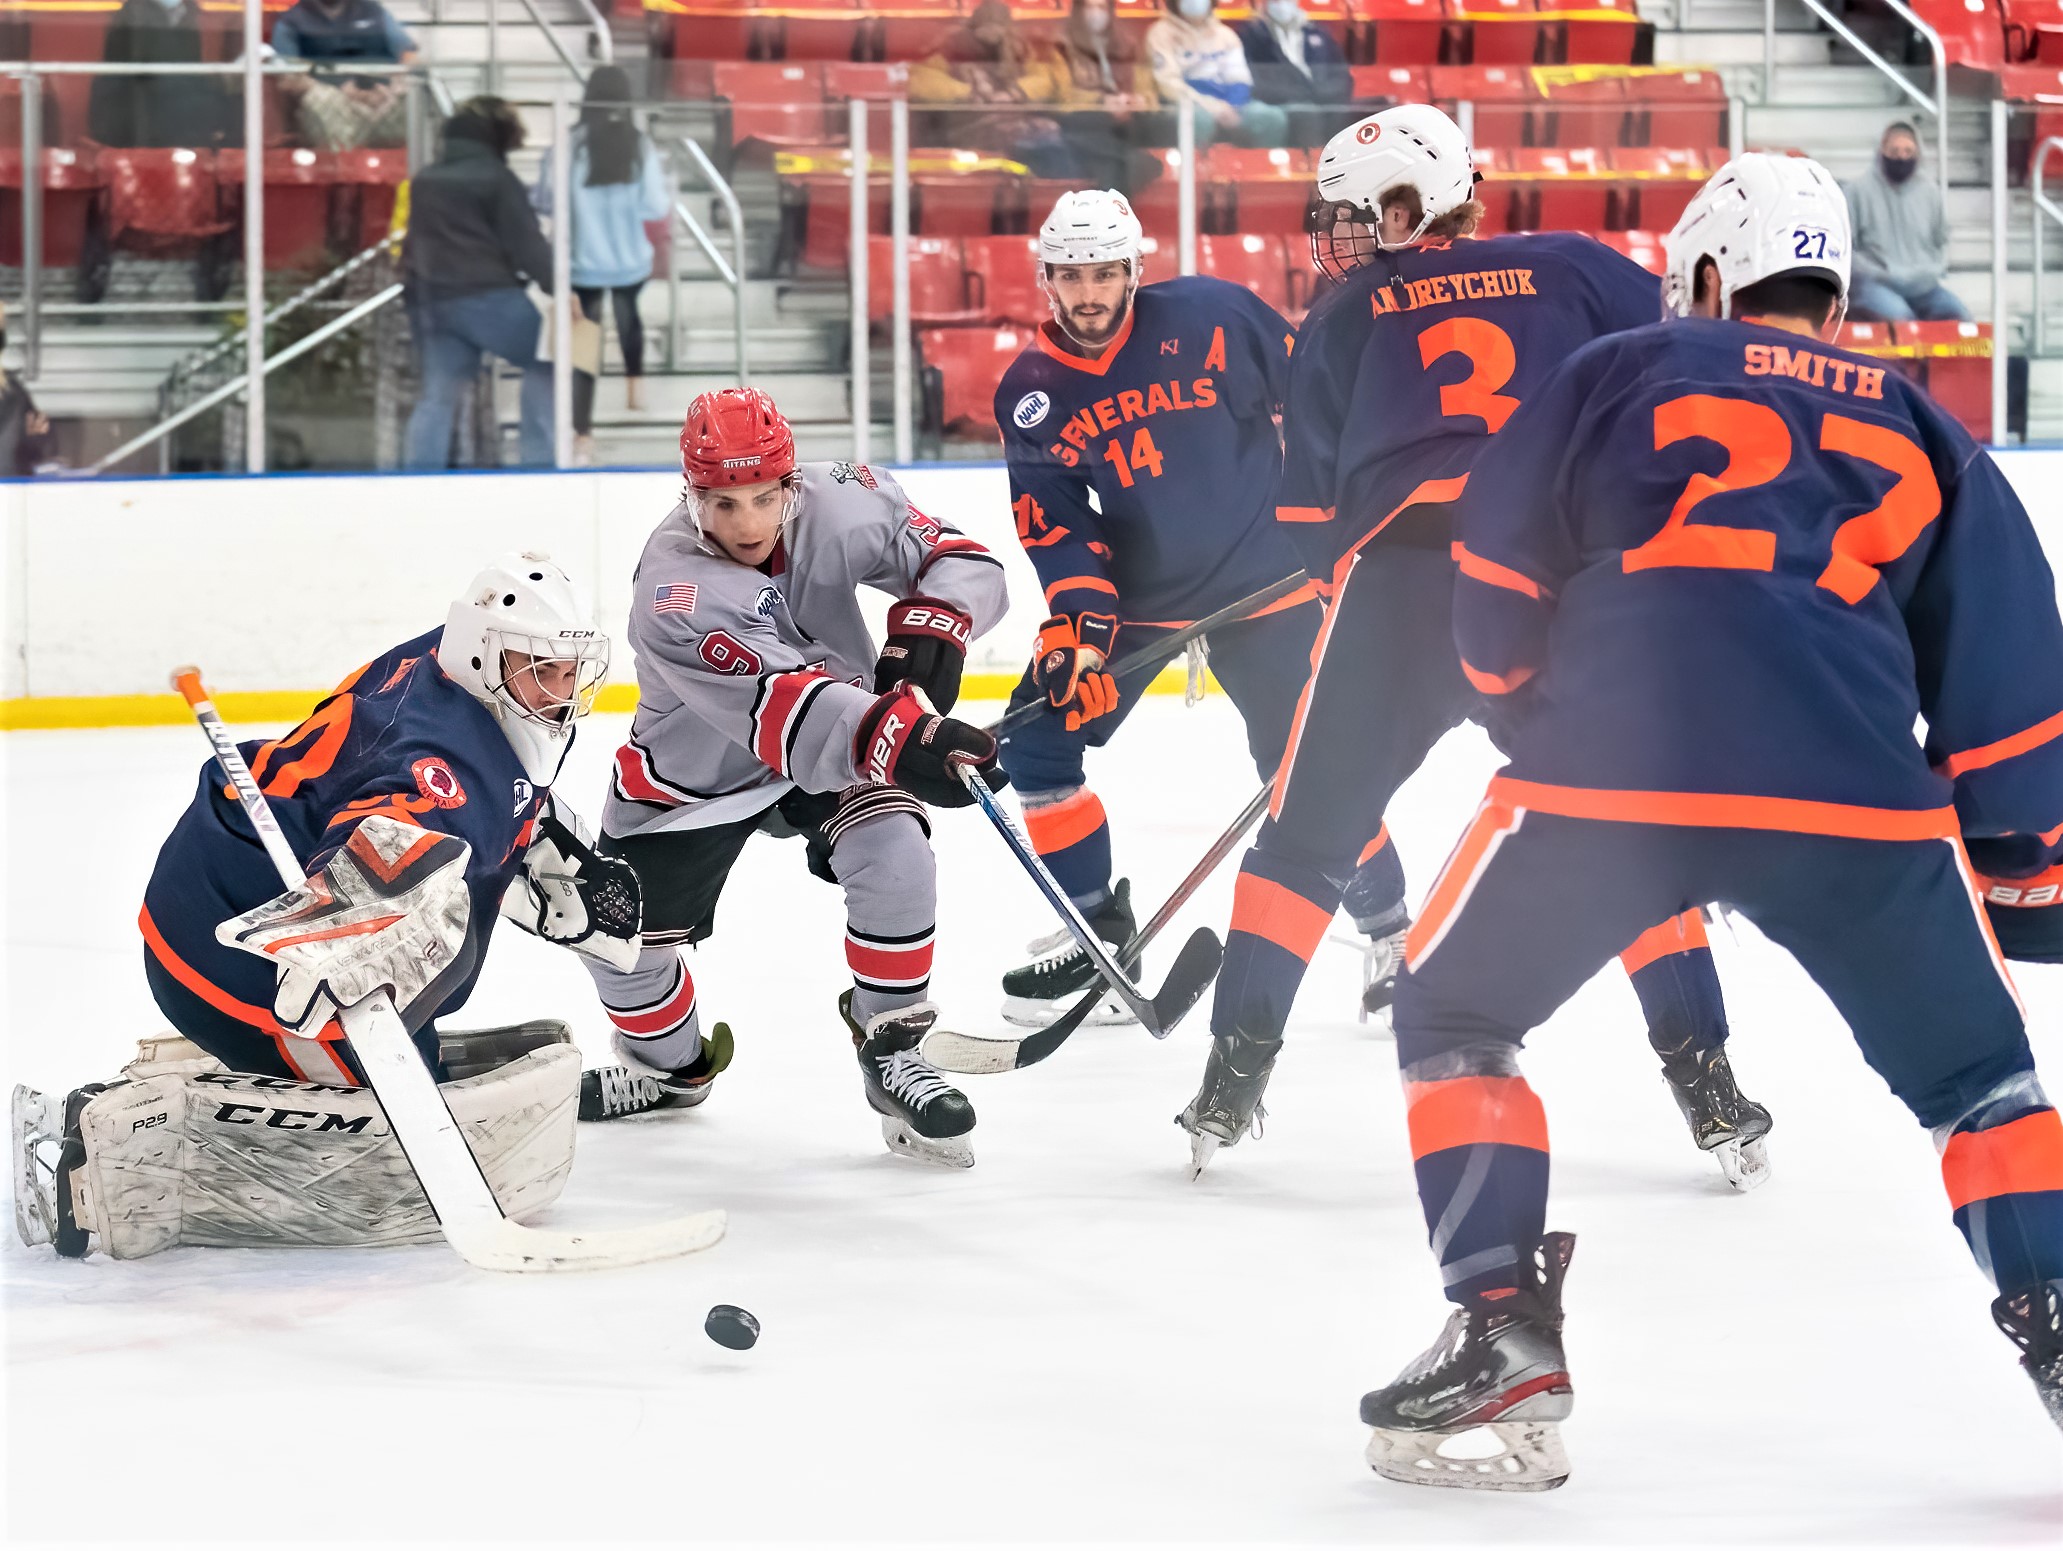 Weekend Preview: 10/15 & 10/16 – Titans travel to Attleboro for 2 game series against Generals